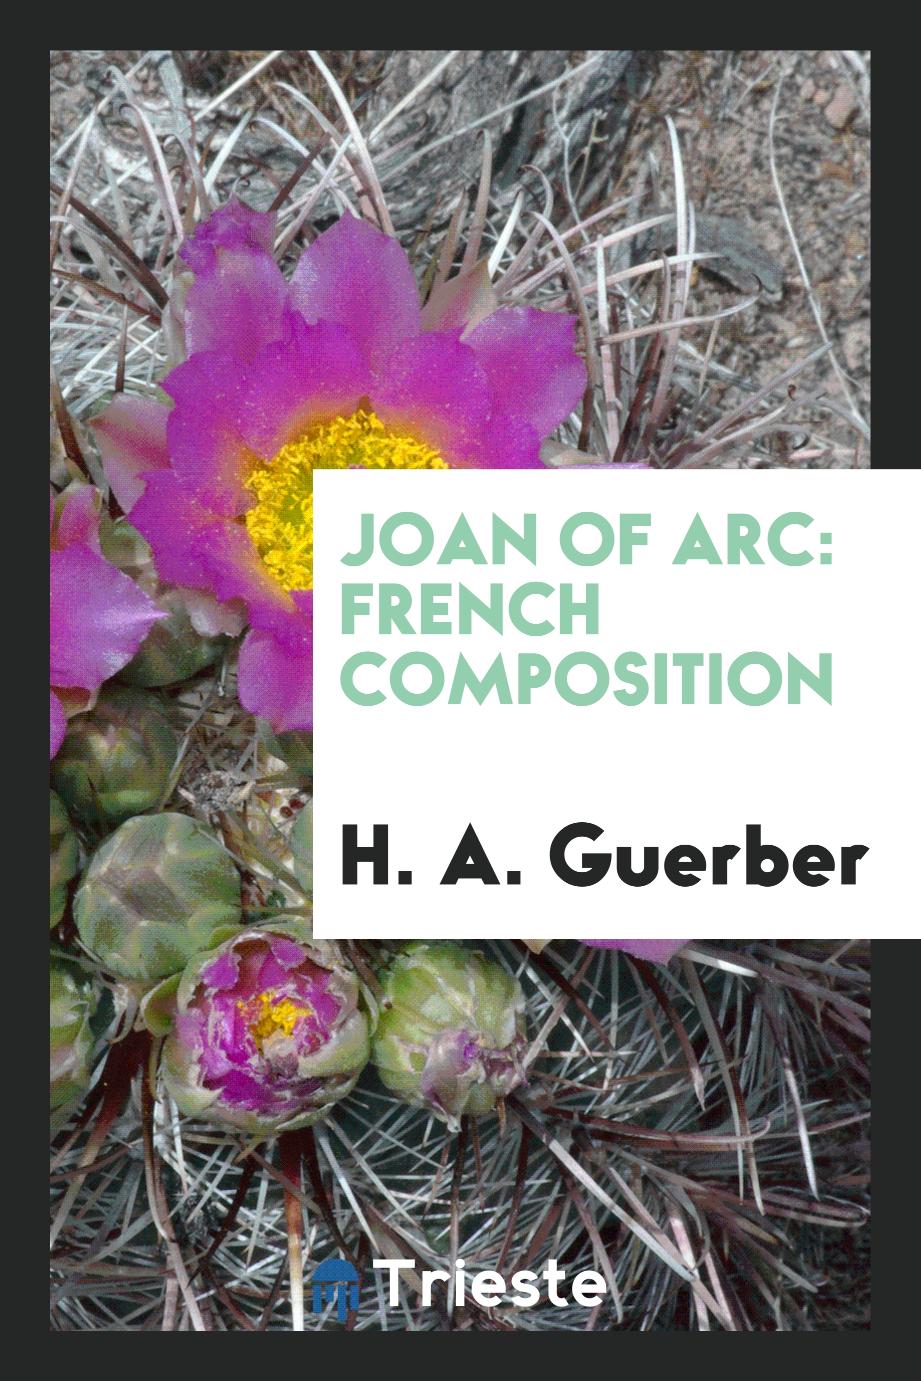 Joan of Arc: French Composition